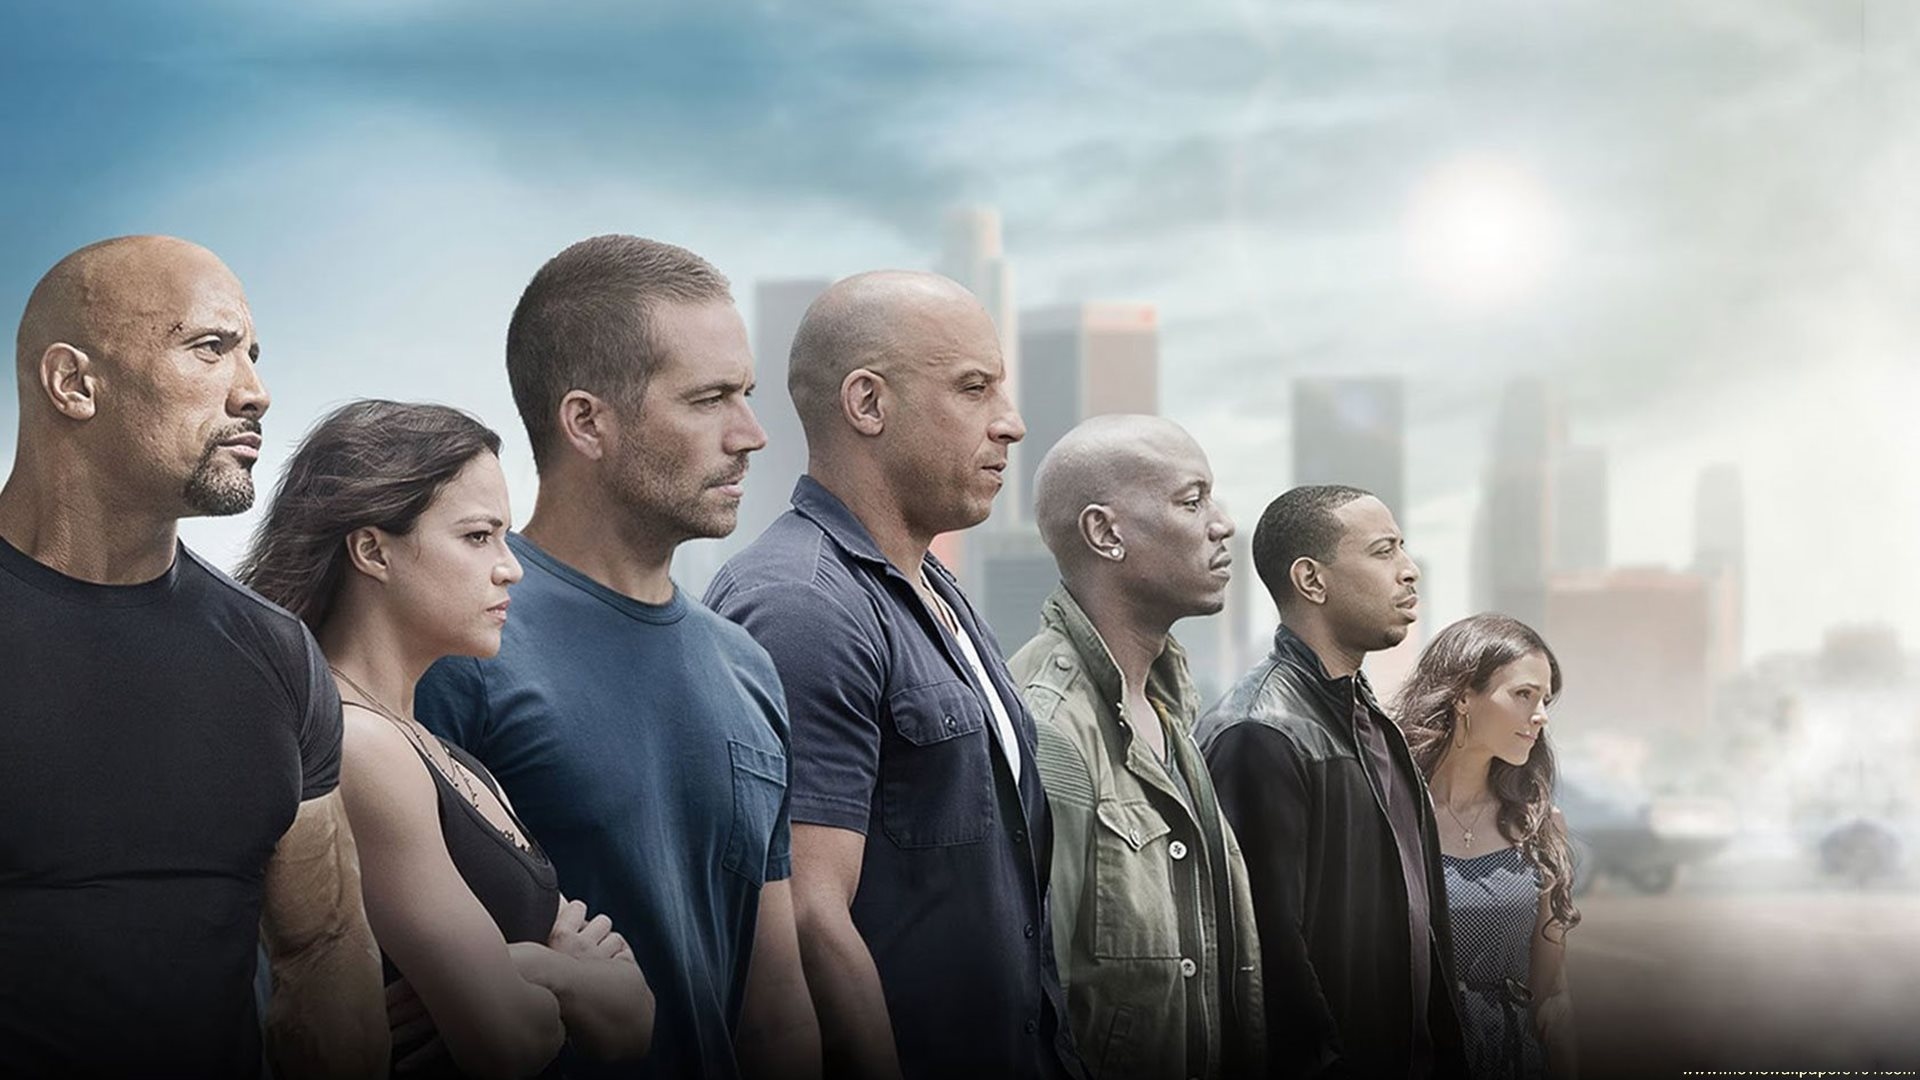 Download Furious 7 2015 Movie Full Cast Poster HD Wallpaper Search